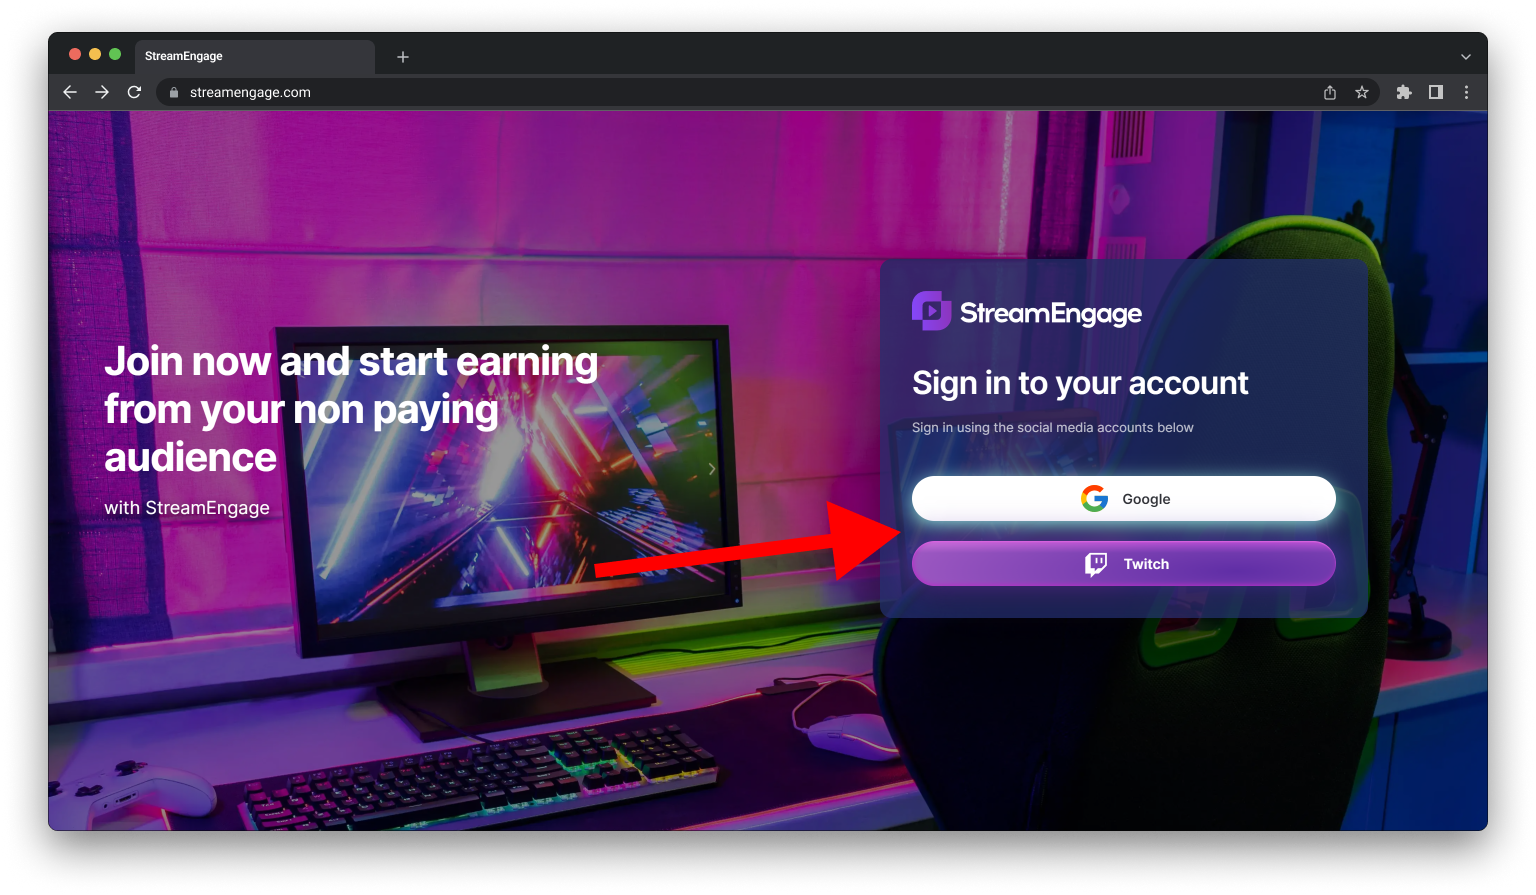 Create an account for StreamEngage